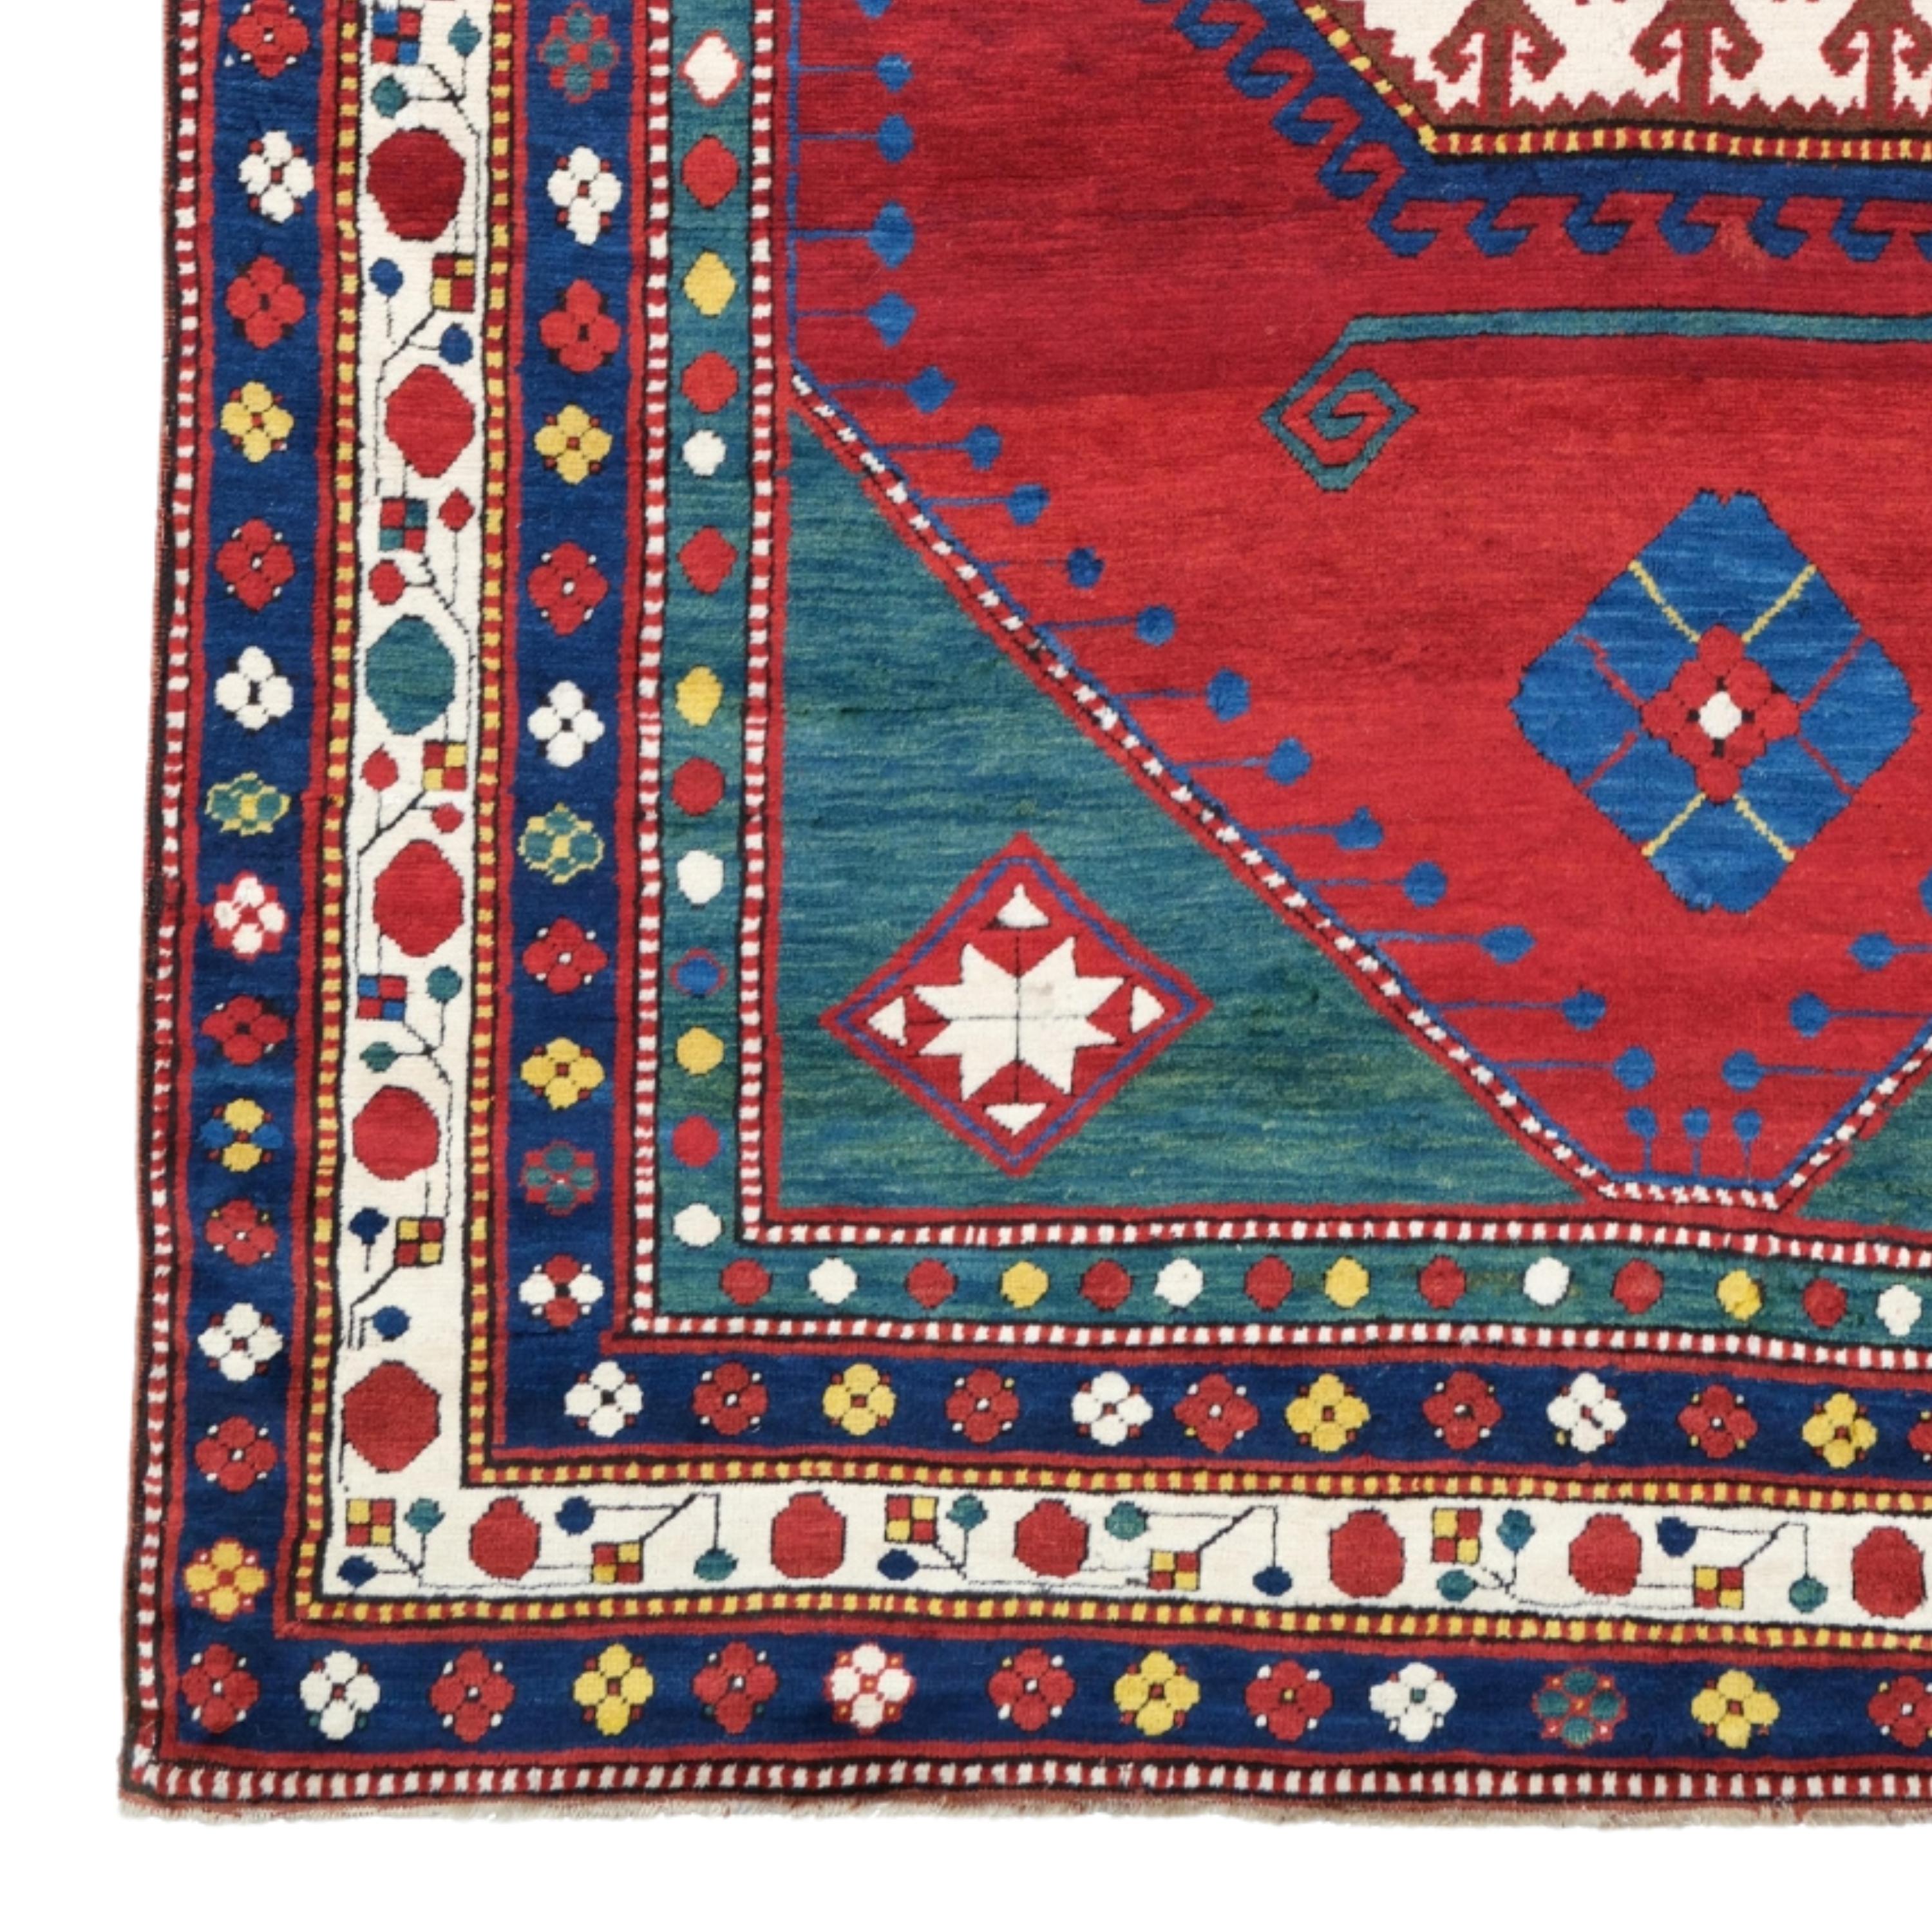 19th Century Caucasian Lambalo Rug
Size: 175x298 cm

This impressive 19th century Caucasian Lambalo Tapestry is a masterpiece reflecting the elegant and sophisticated craftsmanship of a historic period.

Rich Patterns: The carpet is decorated with